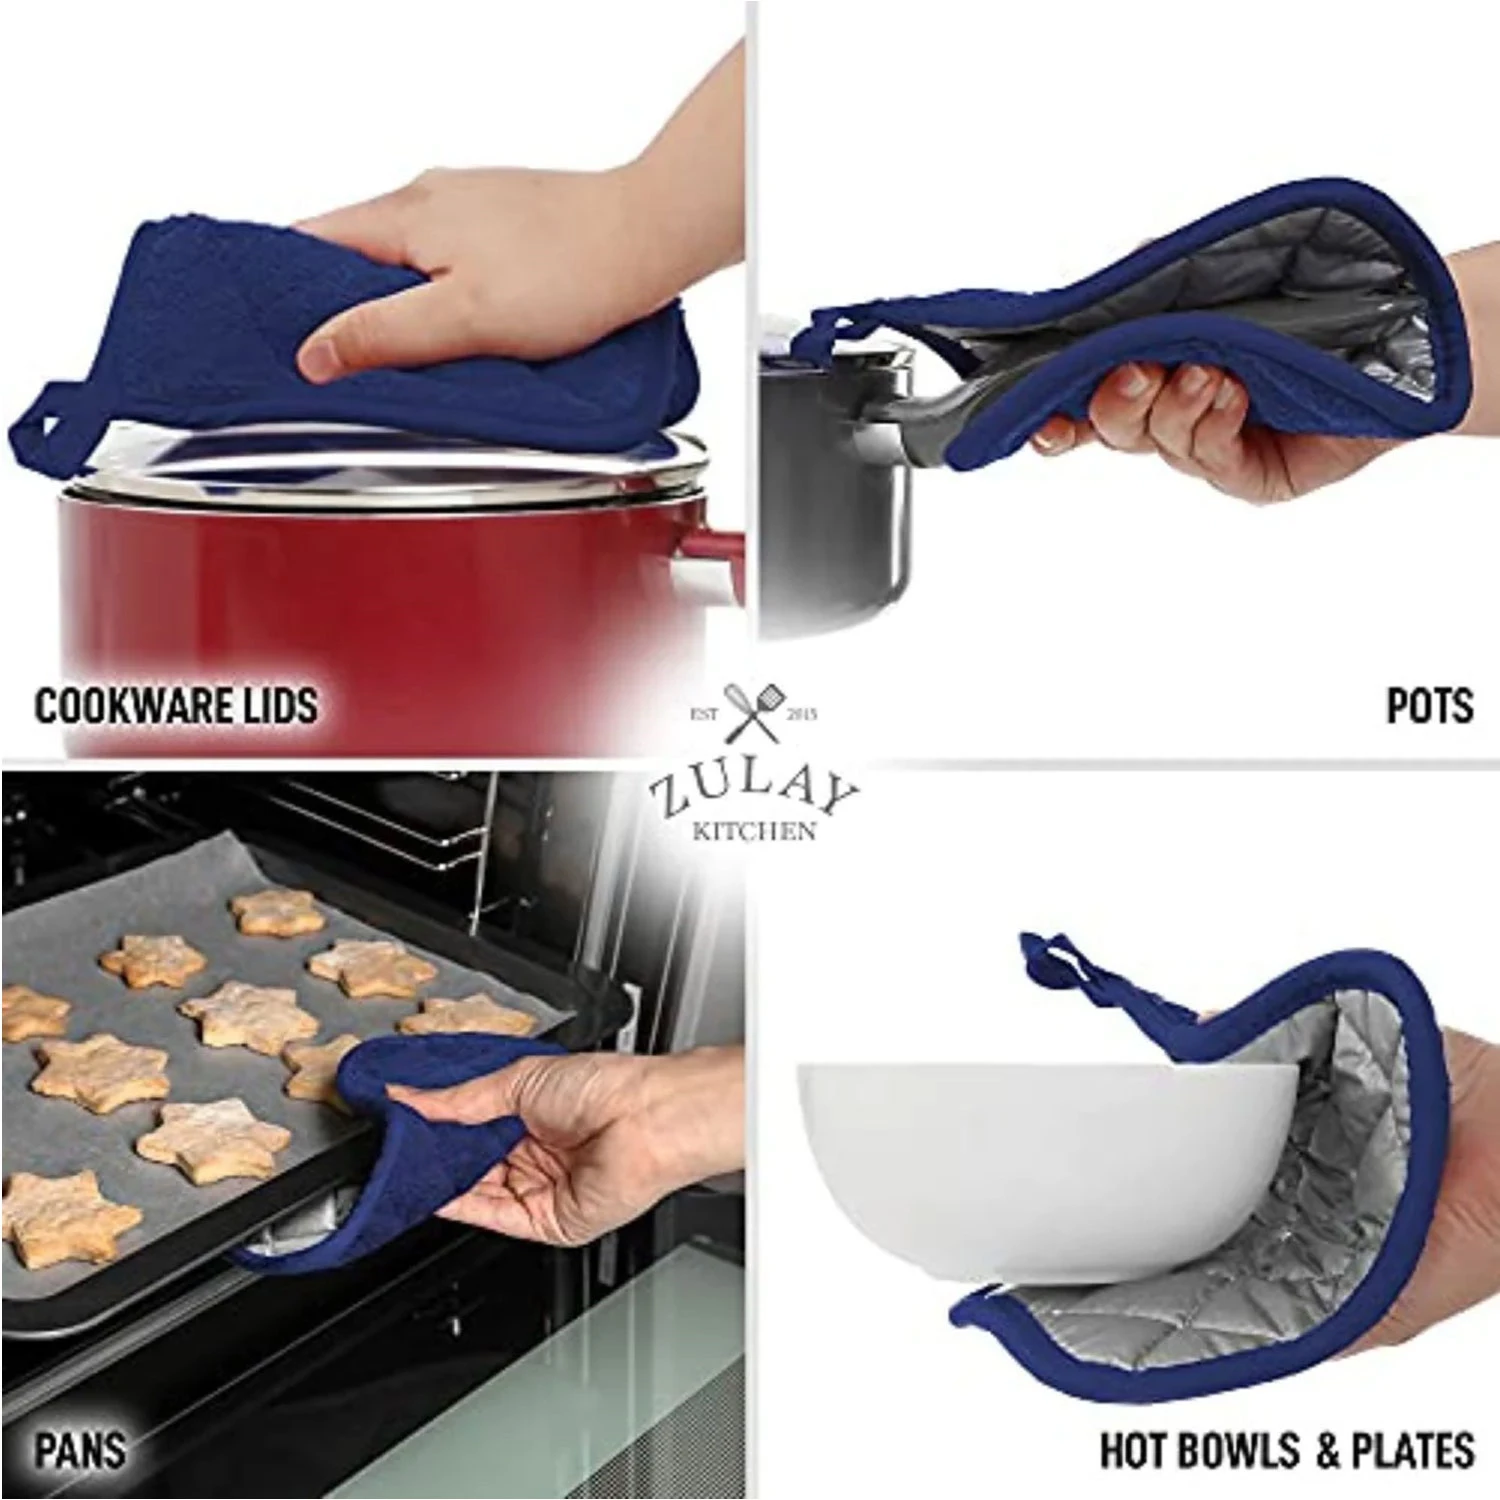 Zulay 3-Pack Heat Resistant Cotton Kitchen Pot Holders